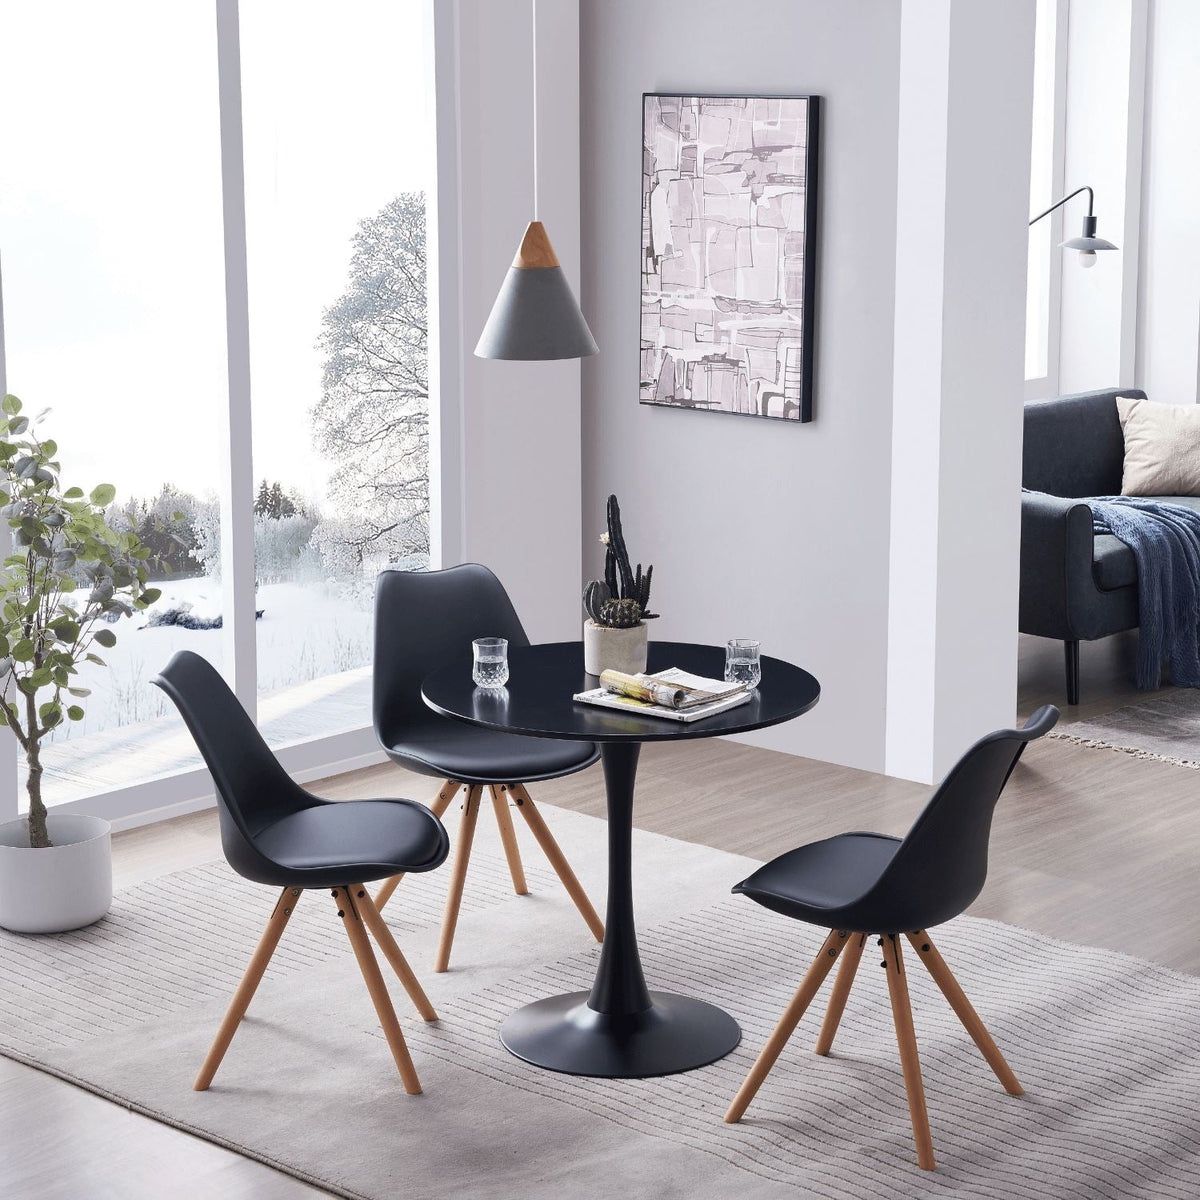 Round Black  Table and chairs